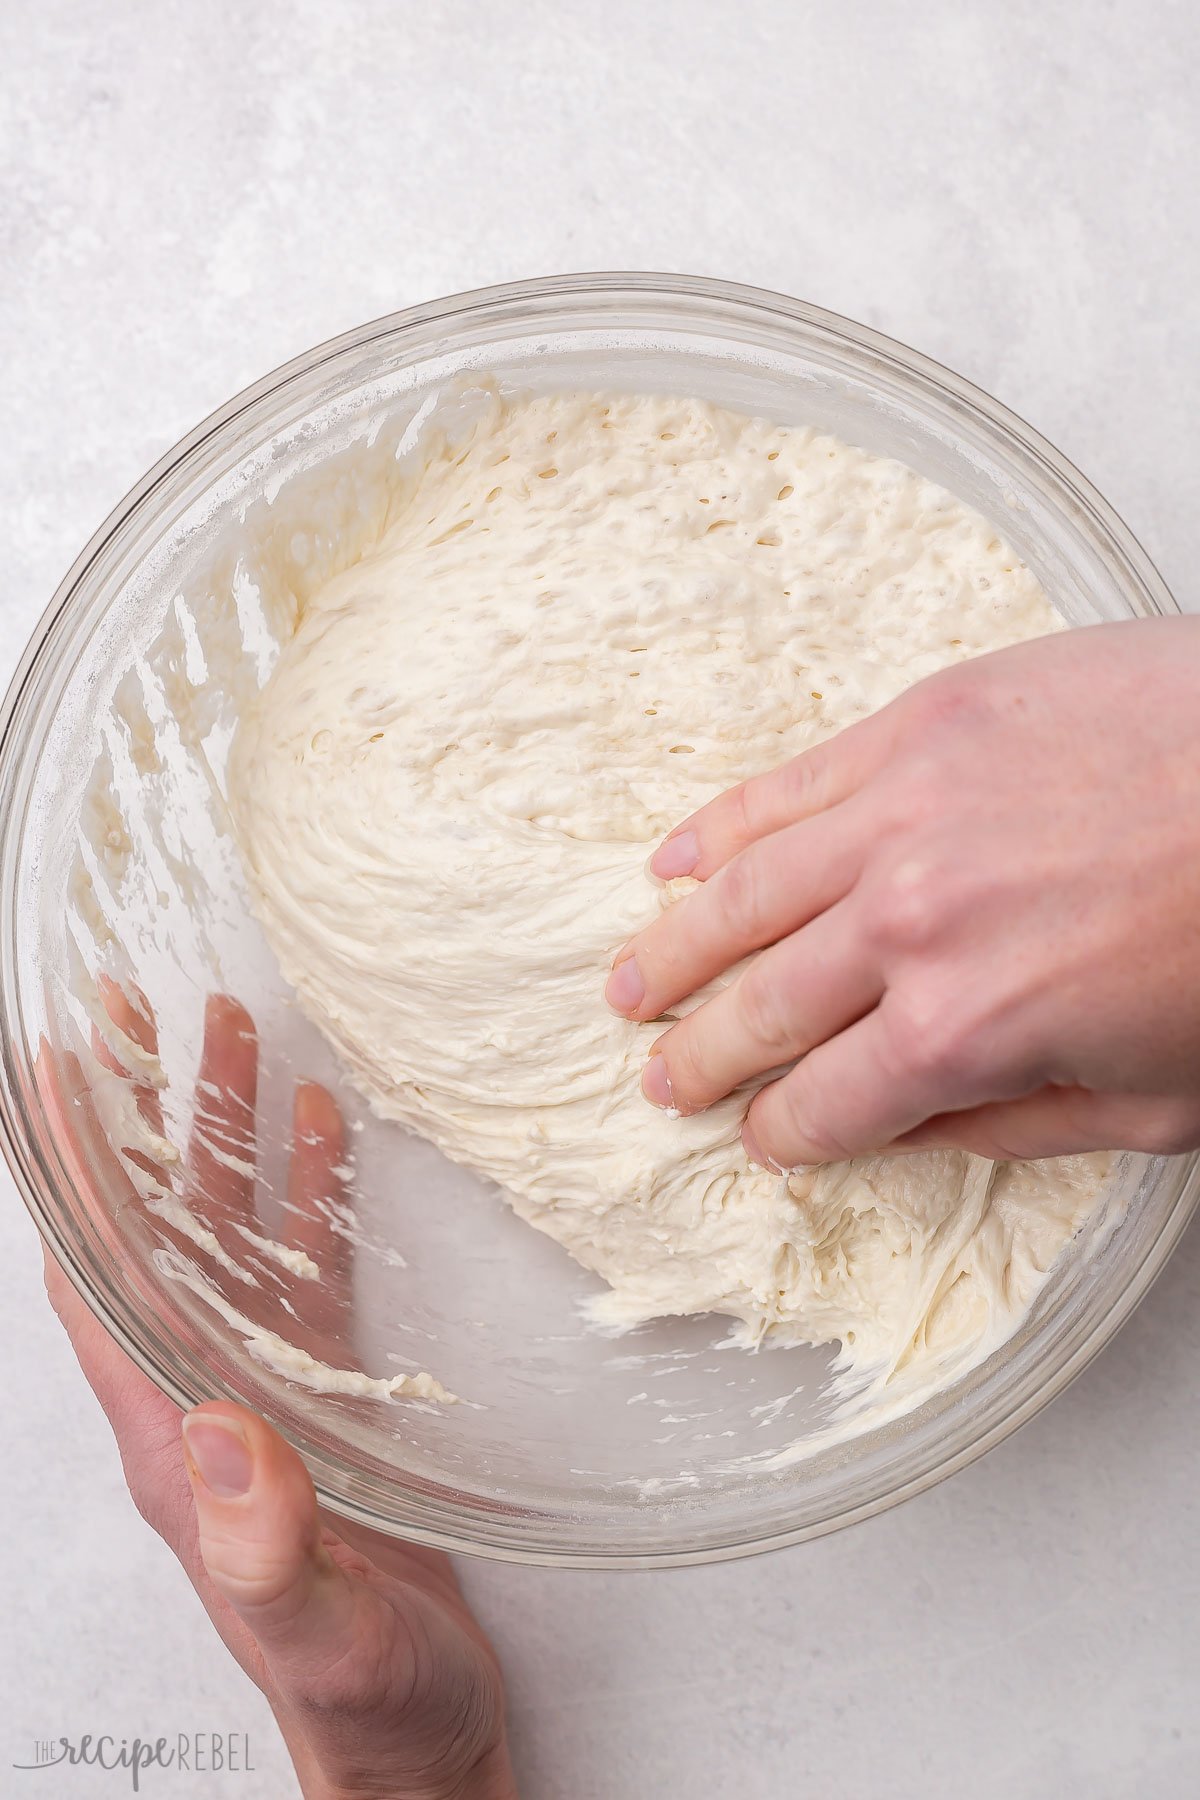 hands in a glass bowl pulling the sticky dough.